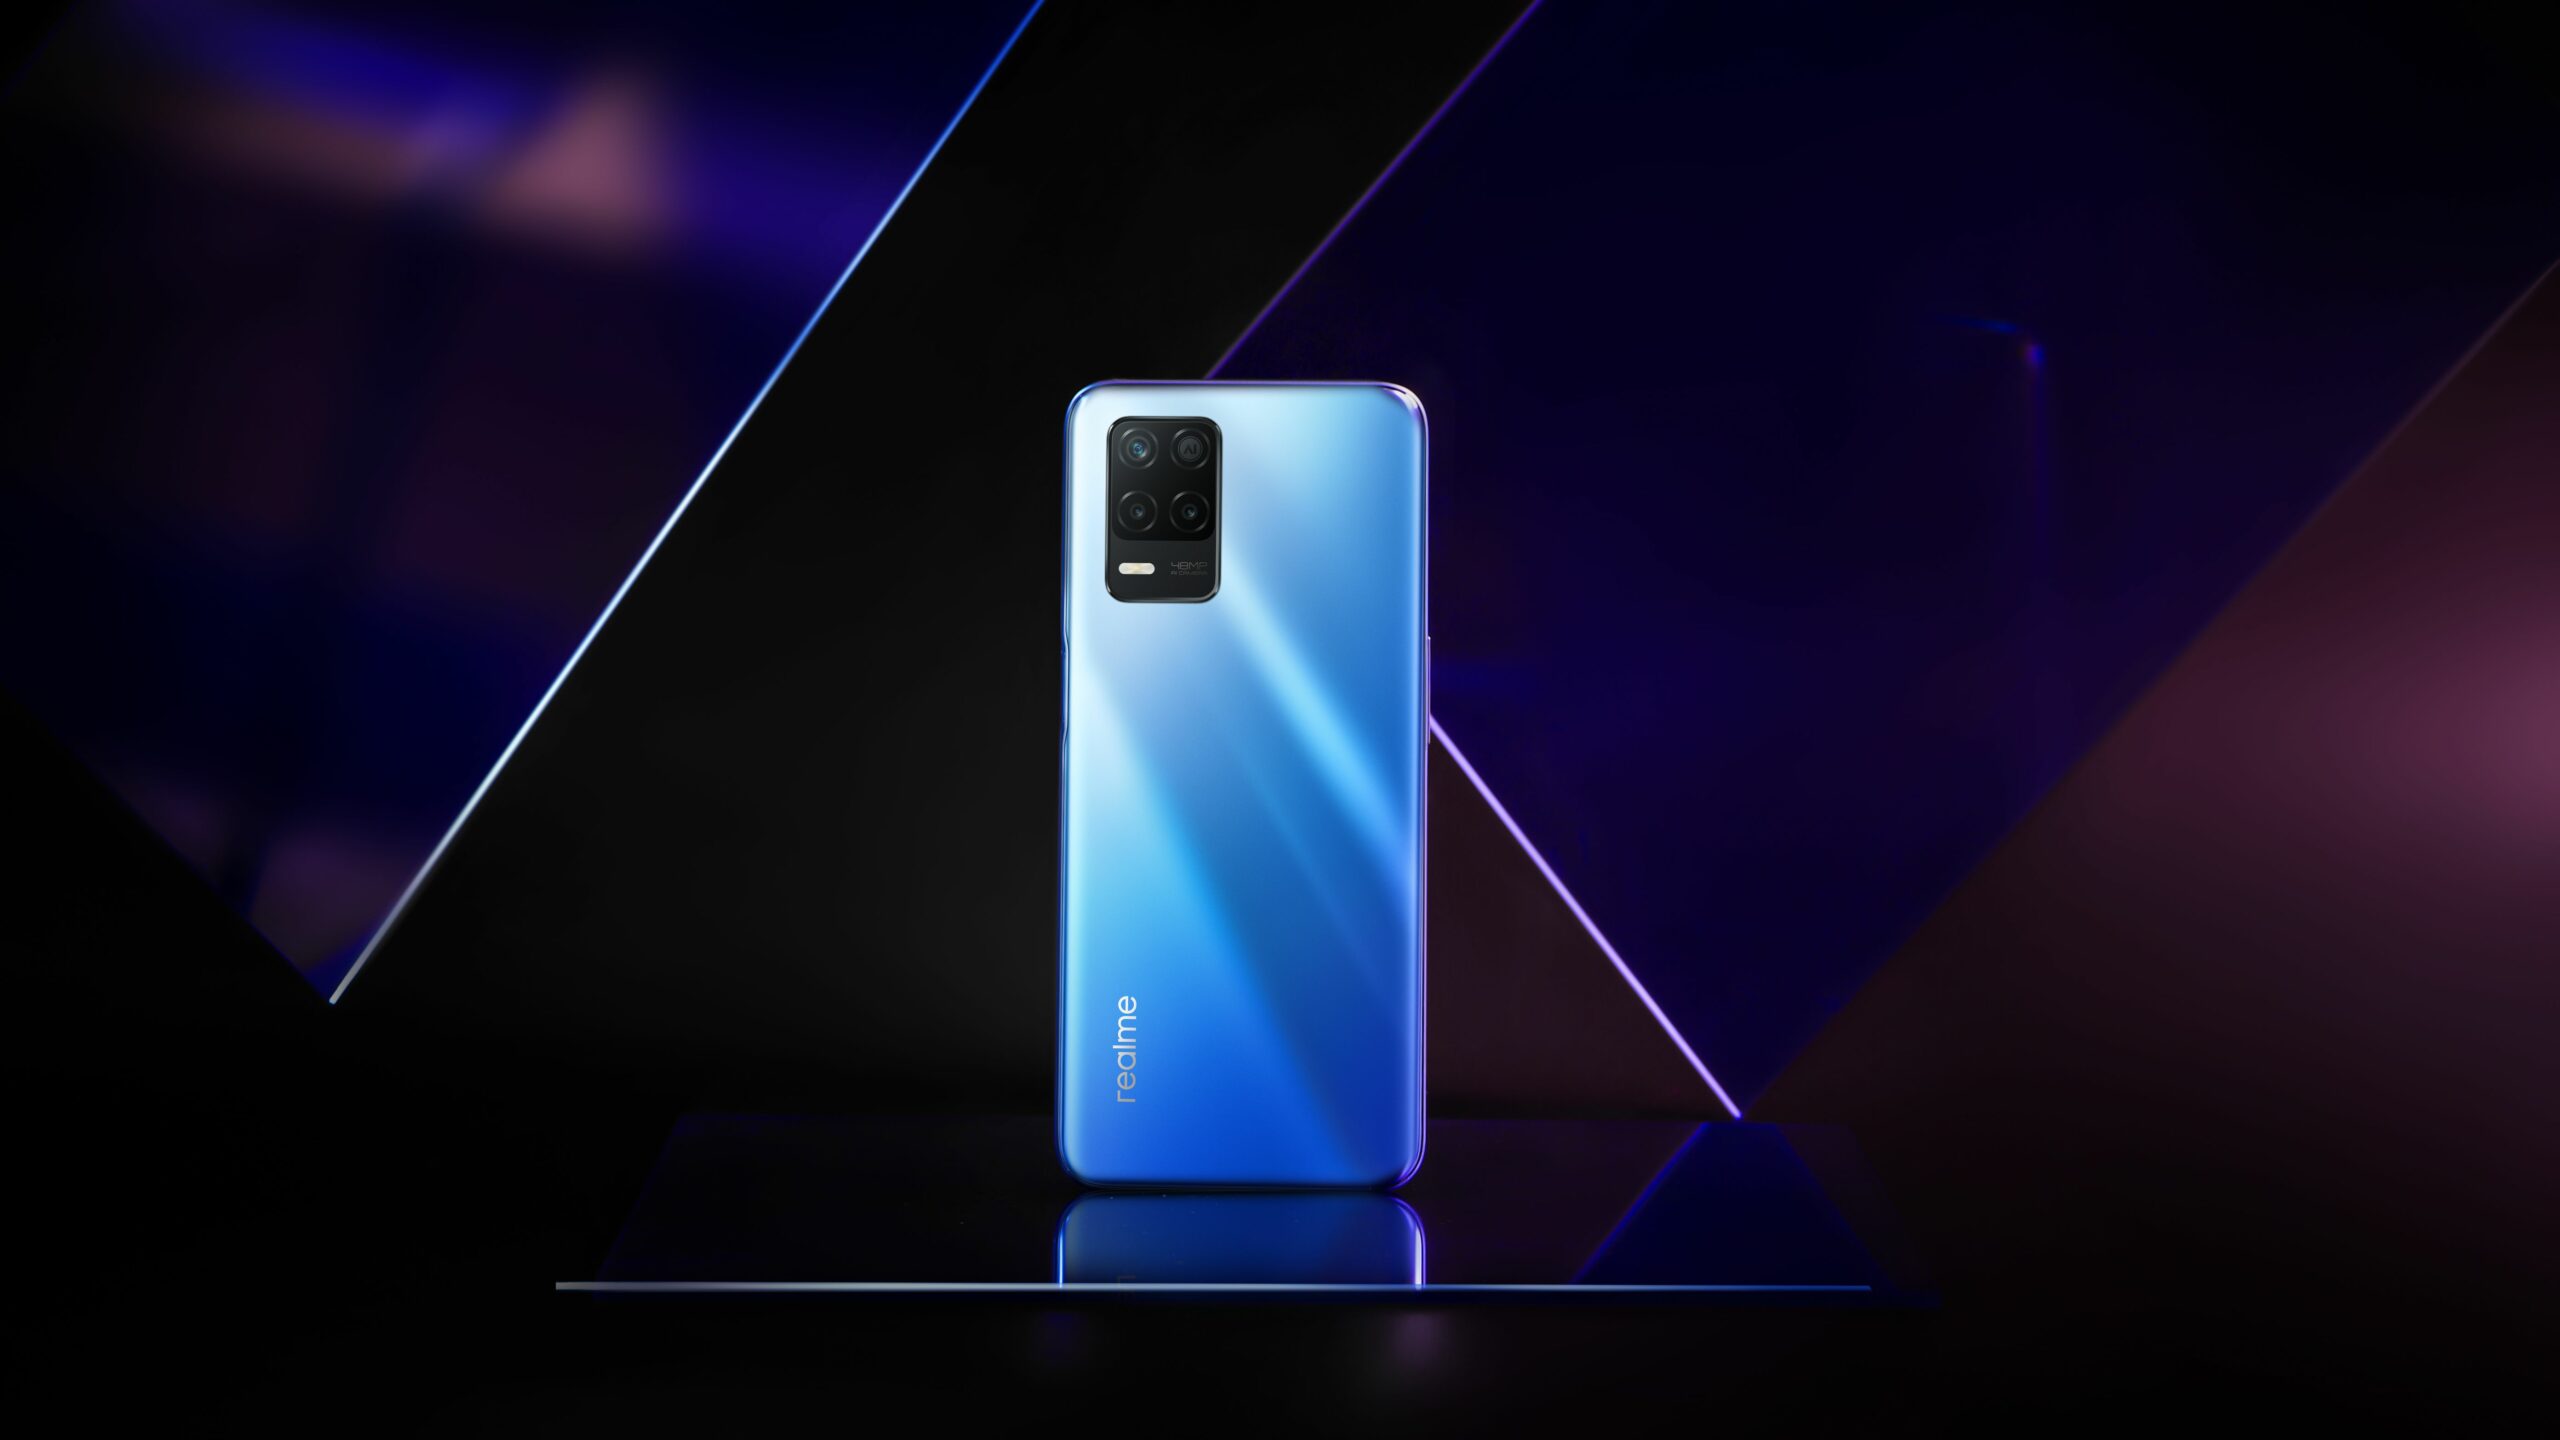 Realme 8 5G launched in India with Dimensity 700 SoC, 90Hz display and more